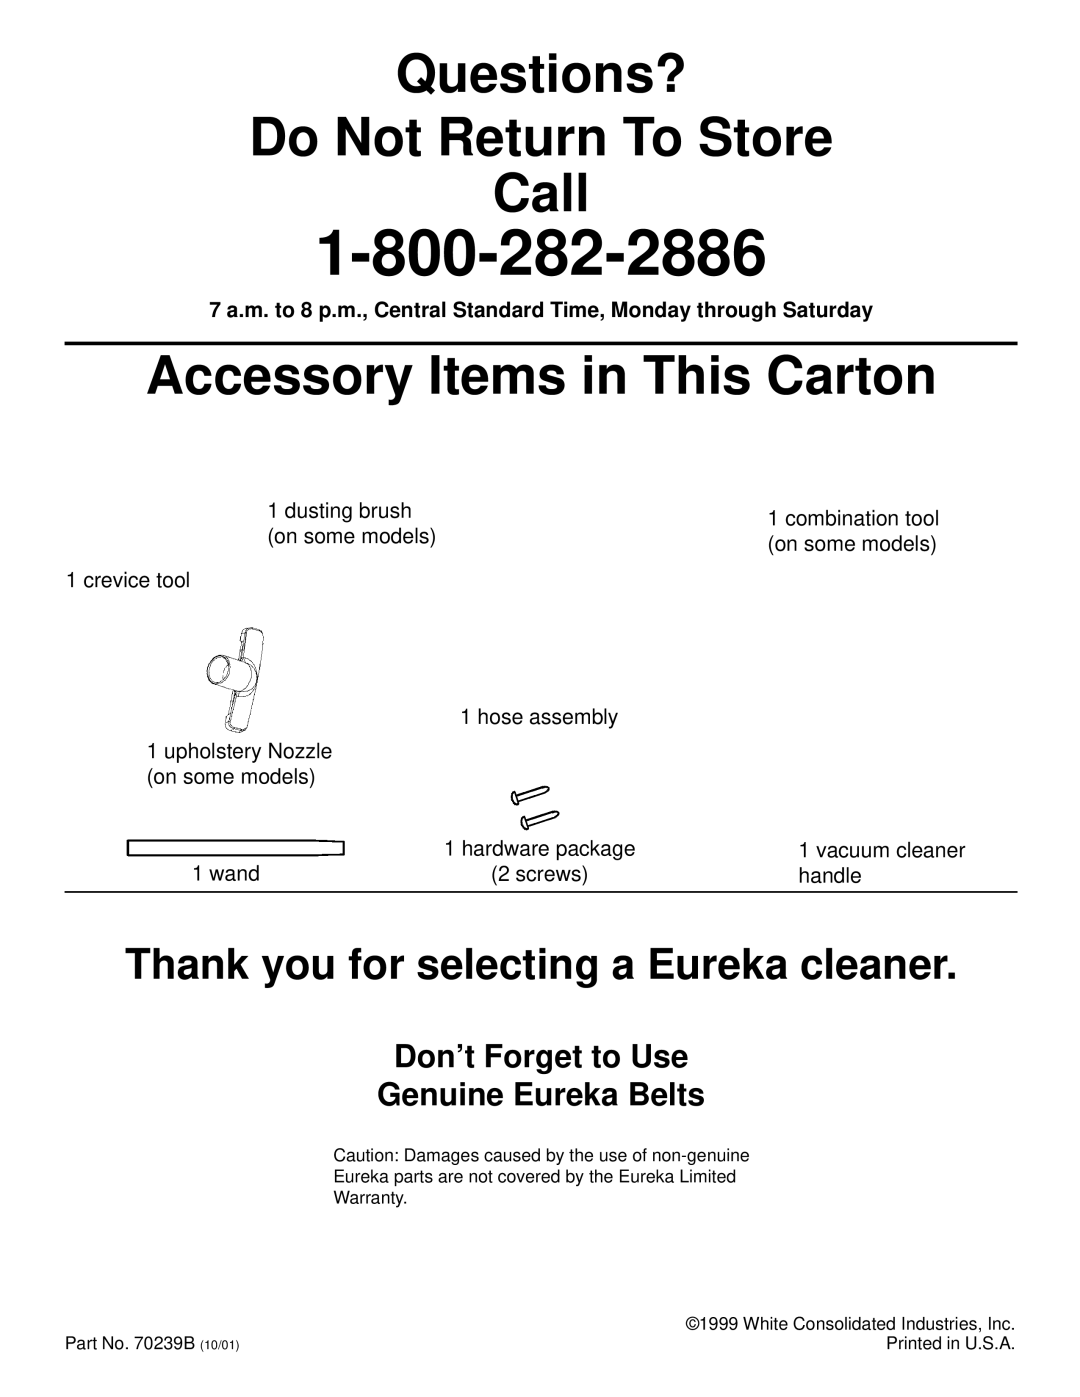 Eureka 4480, 4380 warranty Questions? Do Not Return To Store Call 